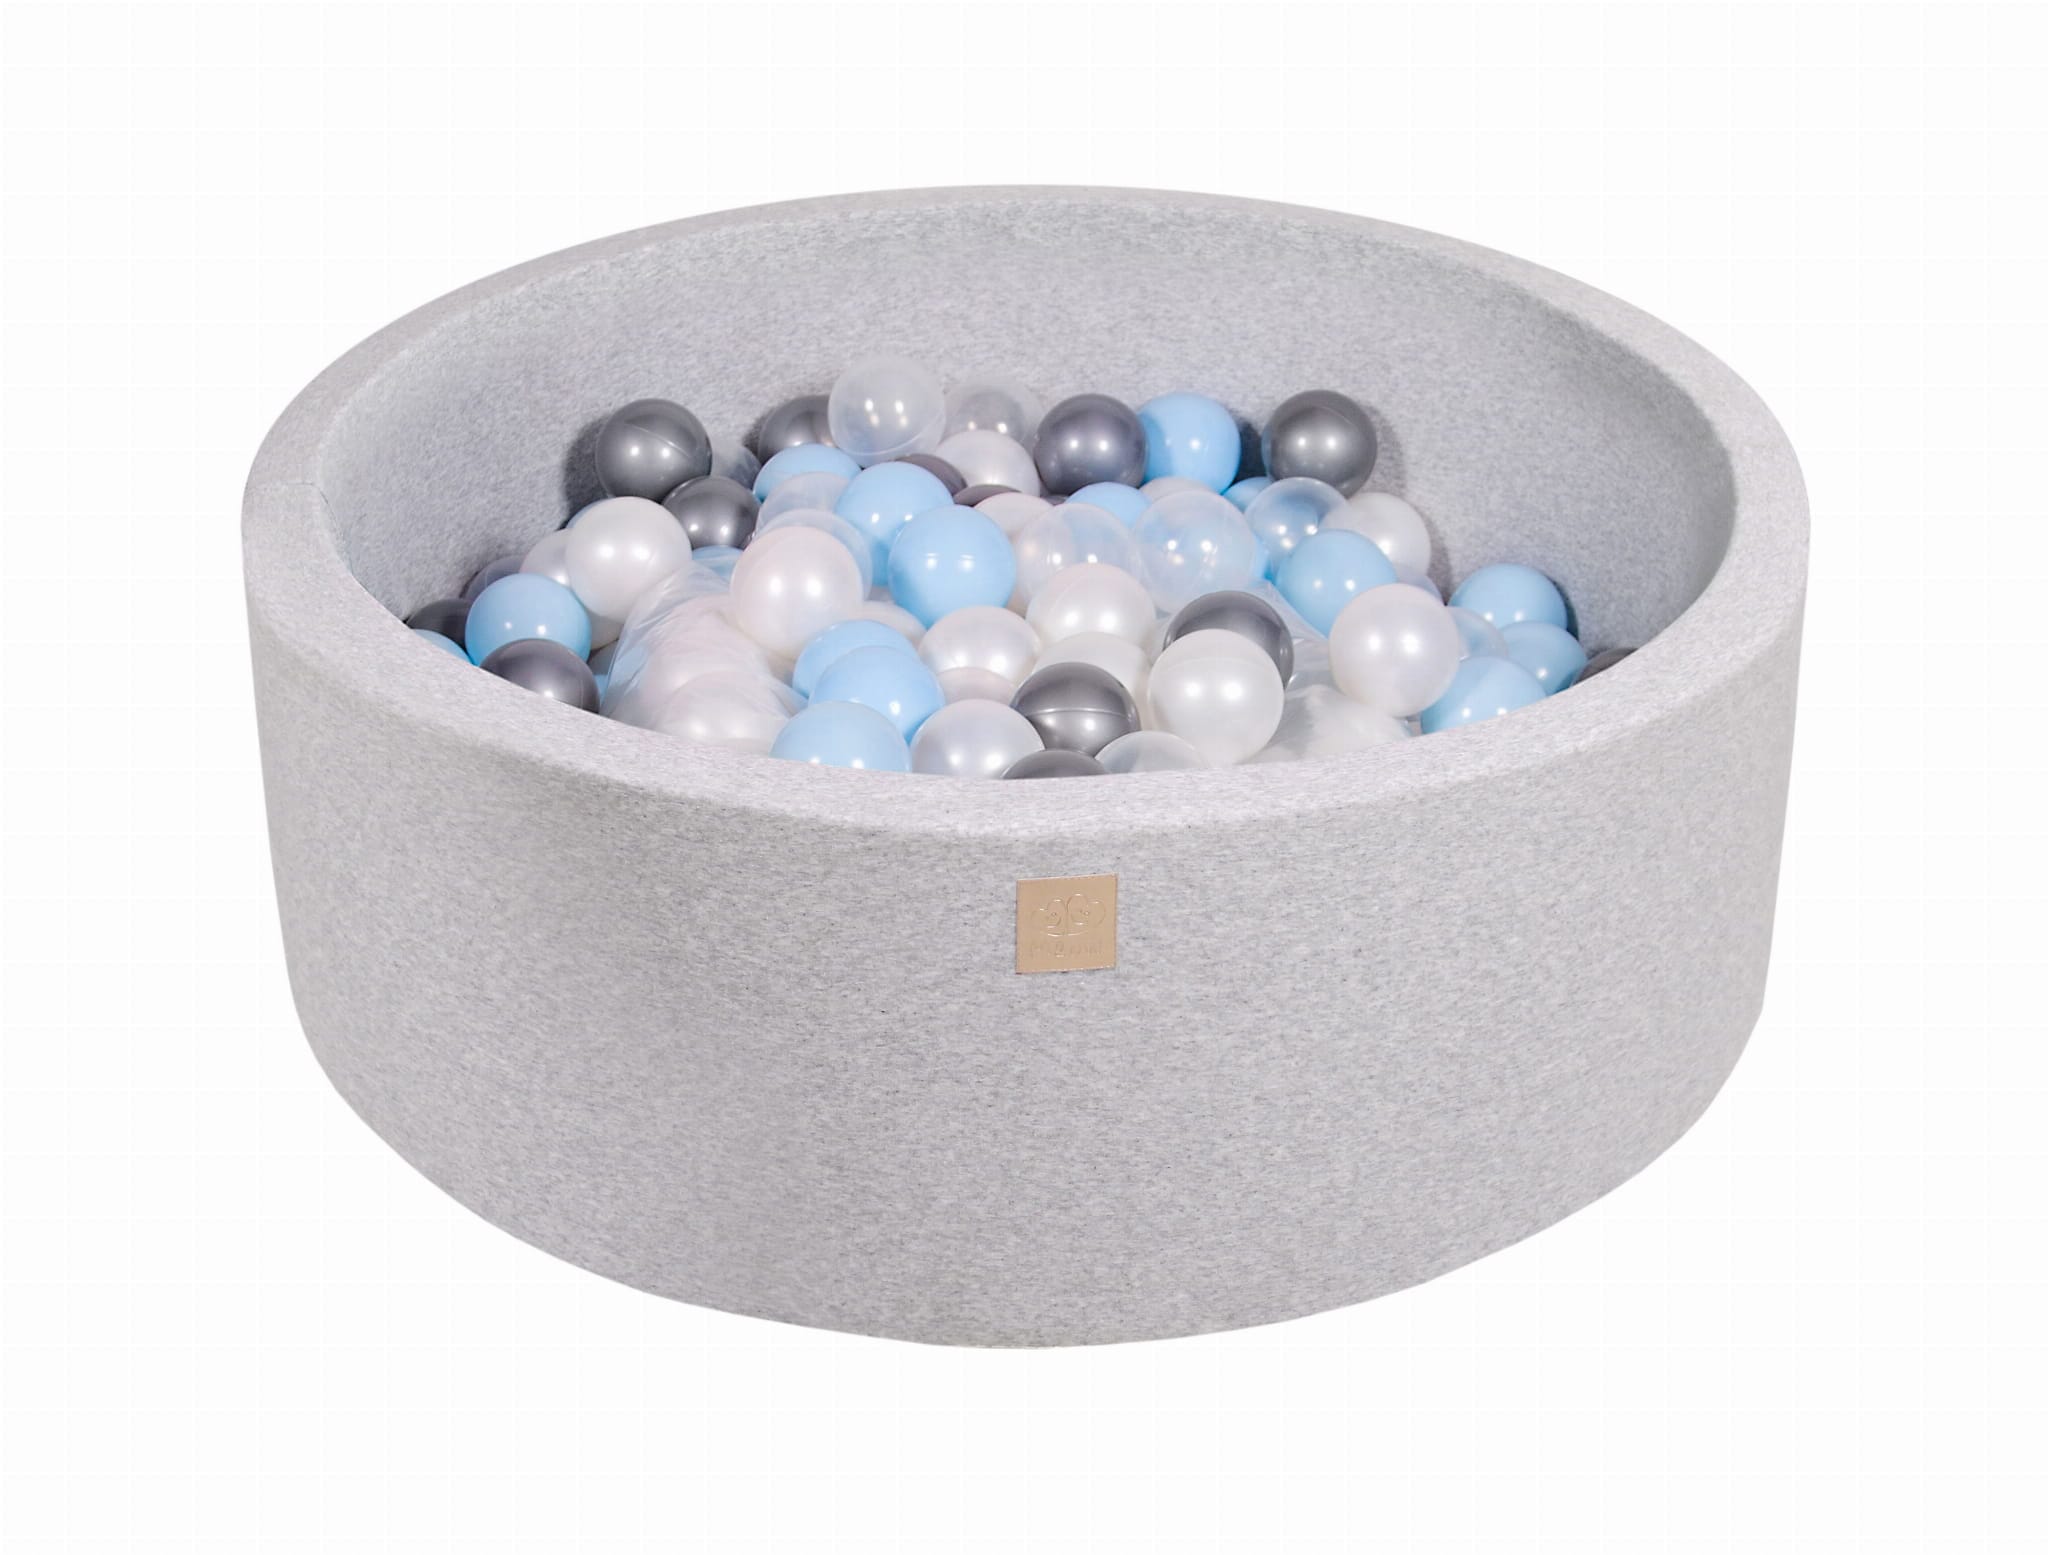 Luxury Cotton Round Ball Pit - Cool 'n Calm For Kids By MeowBaby